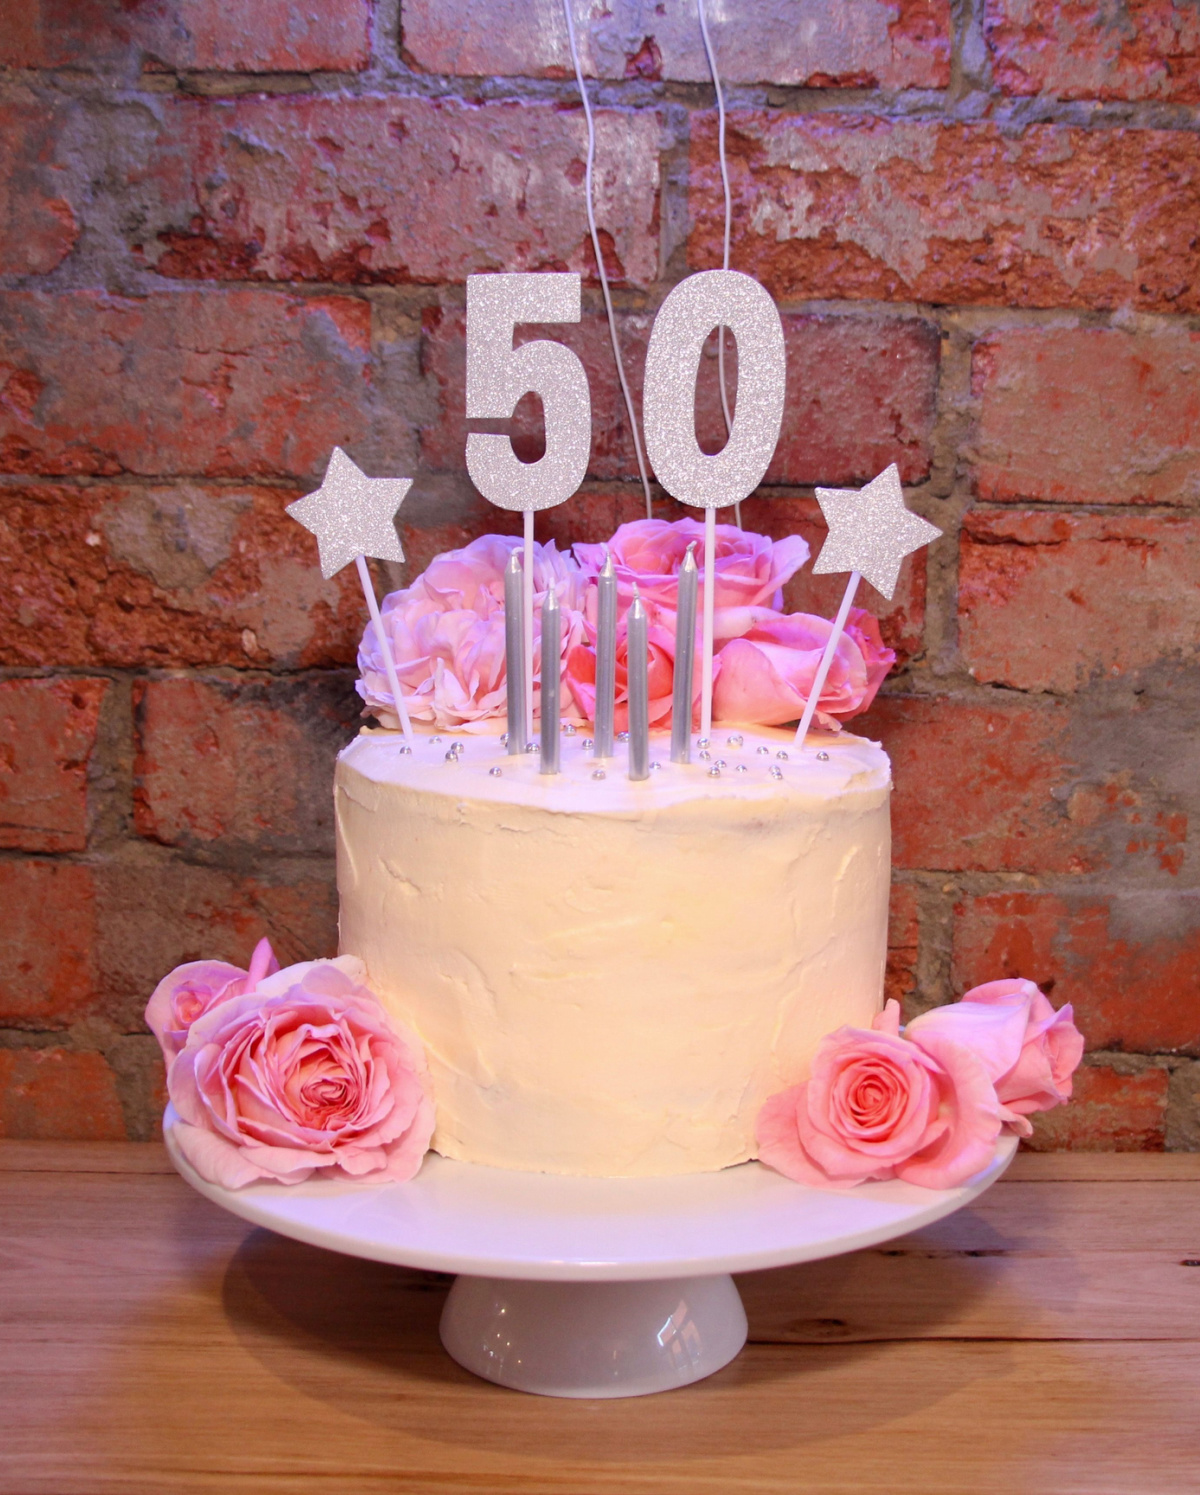 Celebrating a 50th birthday is a big deal! Here are 50 ways to make it feel special! it doesn´t have to be lavish, just memorable.